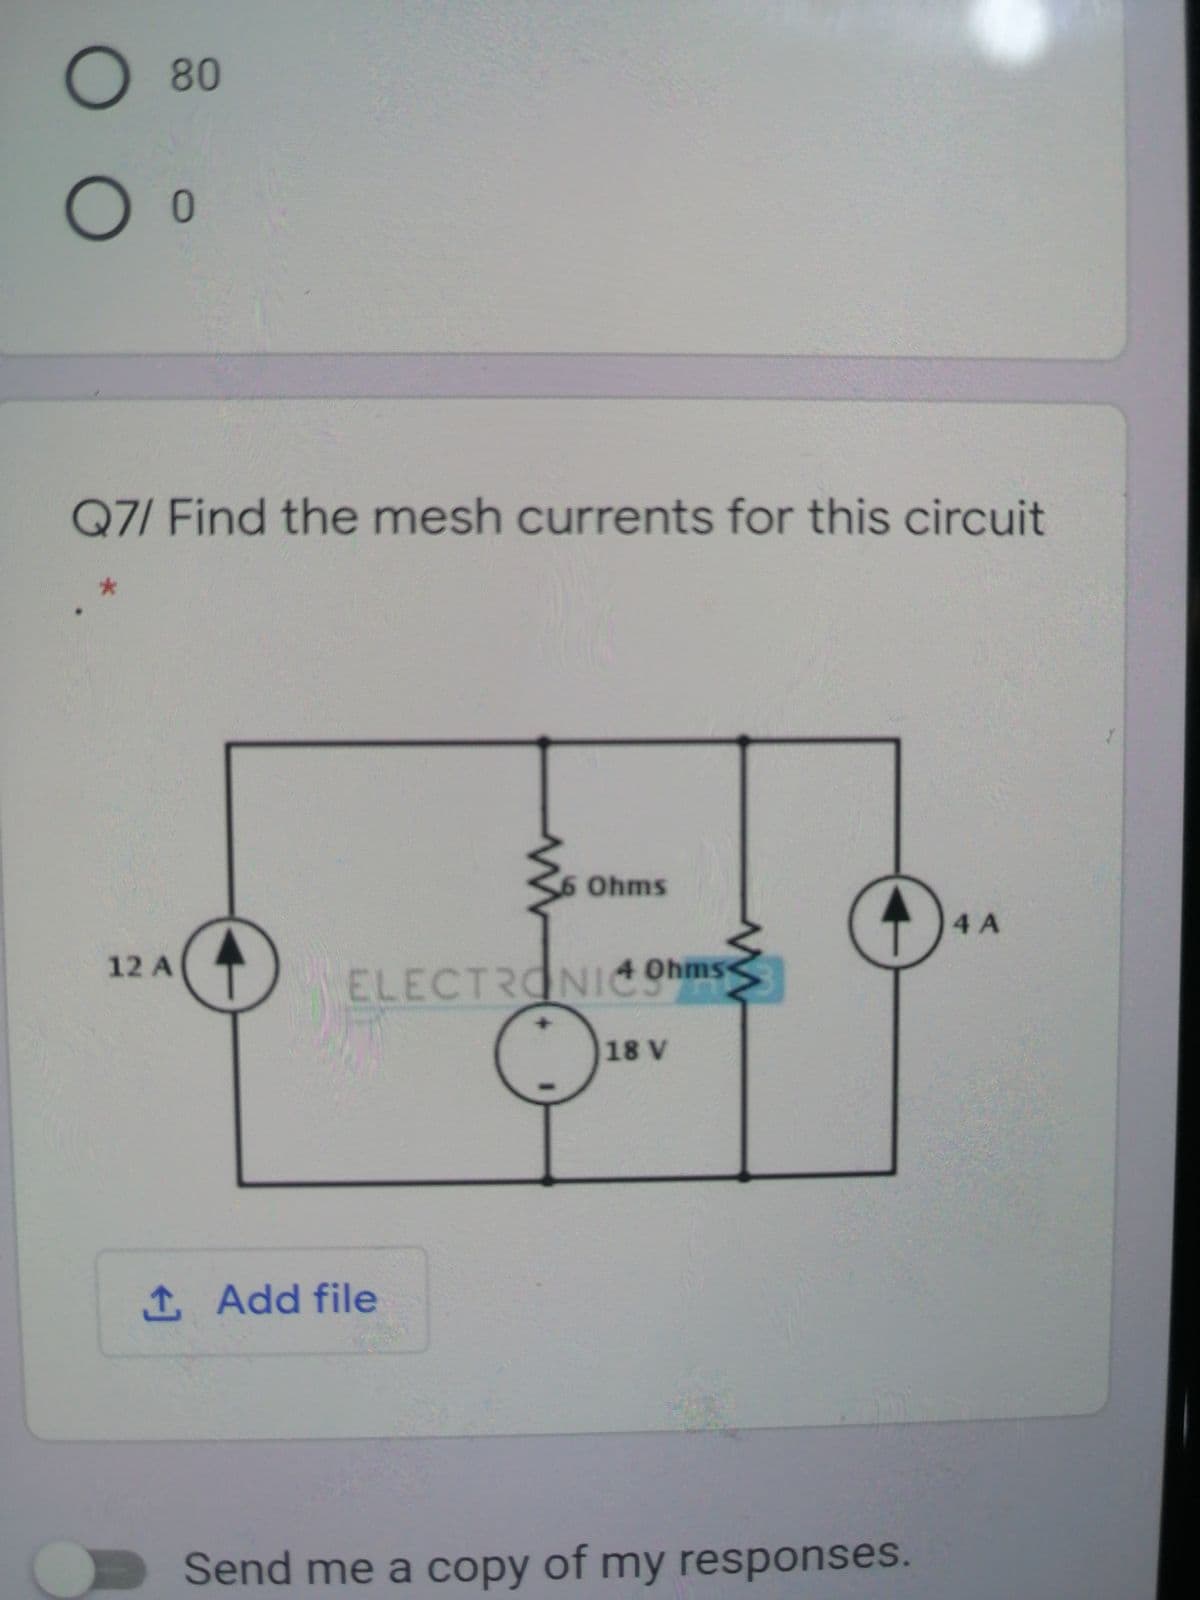 O 80
0.
Q7/ Find the mesh currents for this circuit
*-
Ohms
4A
12 A
ELECTRONI Ohms
18 V
1 Add file
Send me a copy of my responses.
